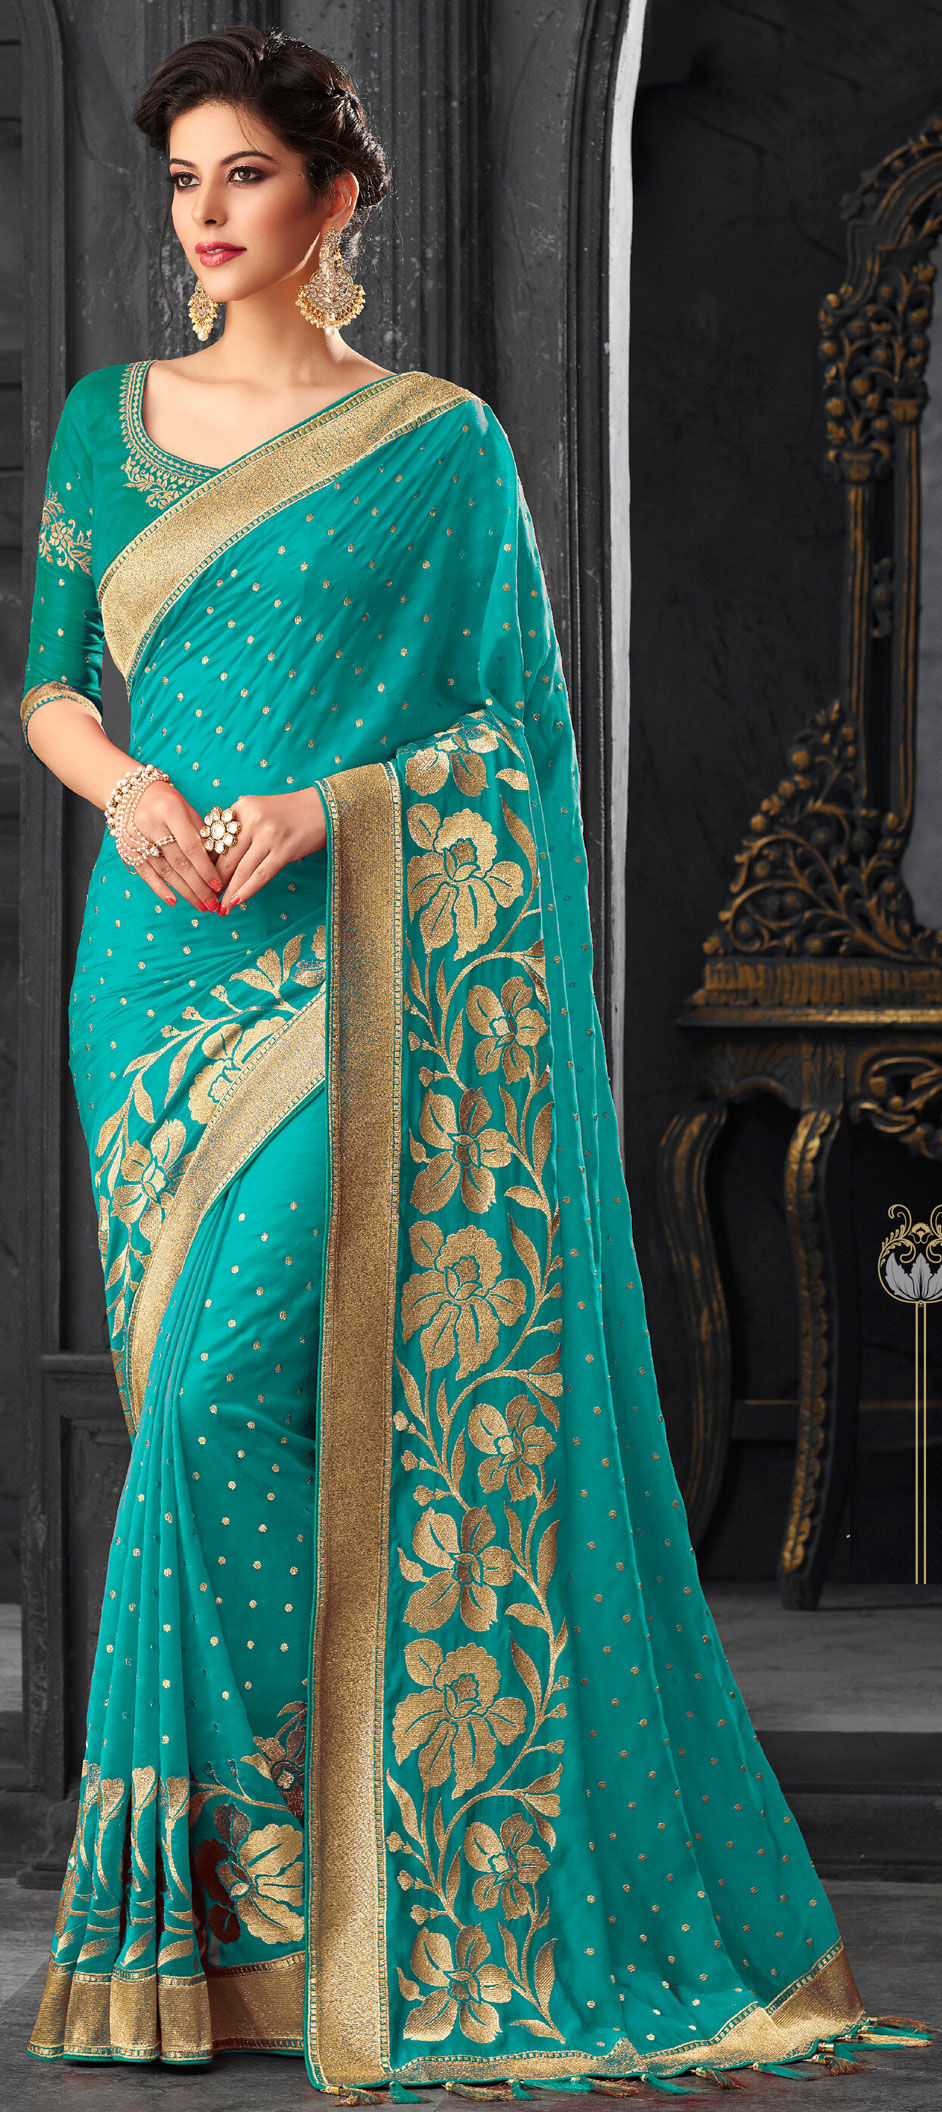 Party Wear Traditional Blue Color Dupion Silk Silk Fabric Saree 1566774